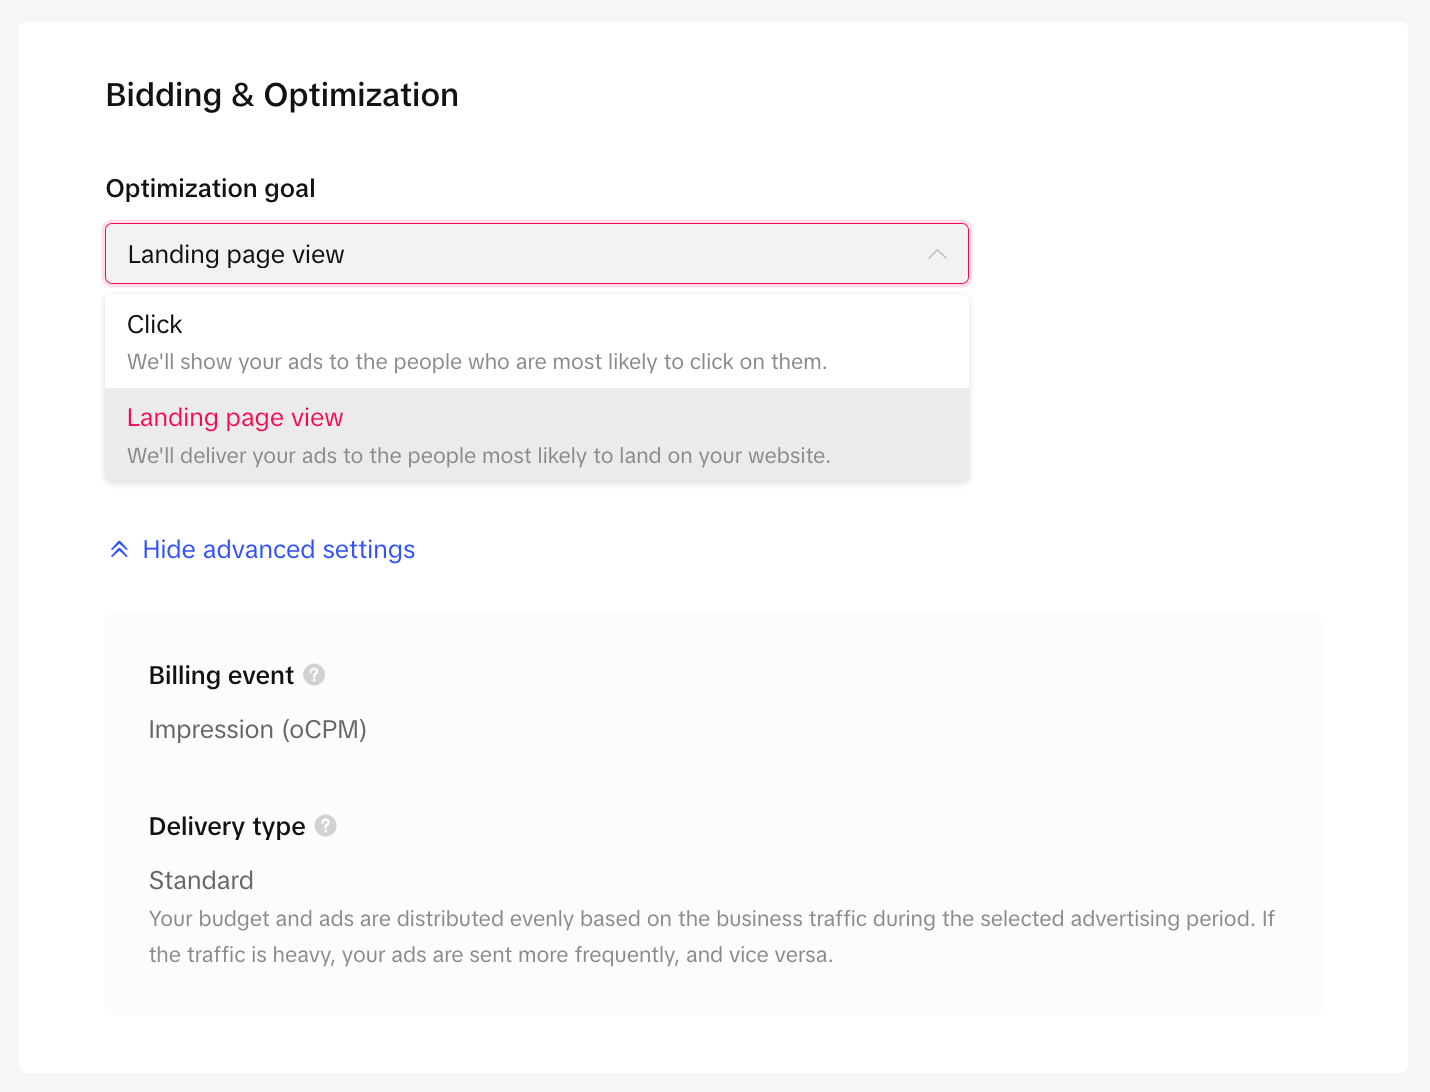 The bidding and optimization Tab lets you enter an optimization goals and has advanced settings such as billing events and delivery types.